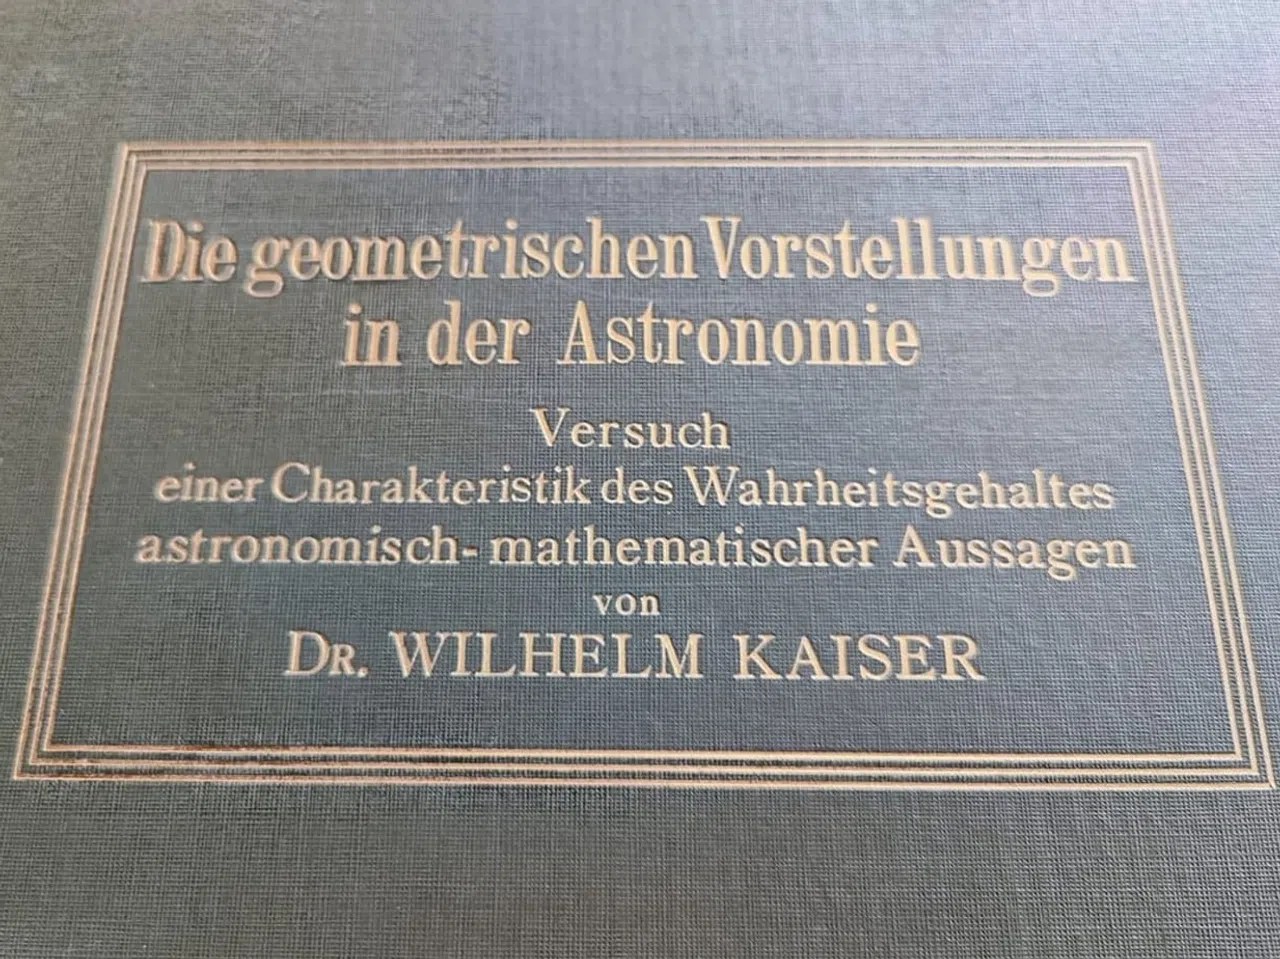 Kaiser wrongly assumed that the Earth was the centre of the universe.